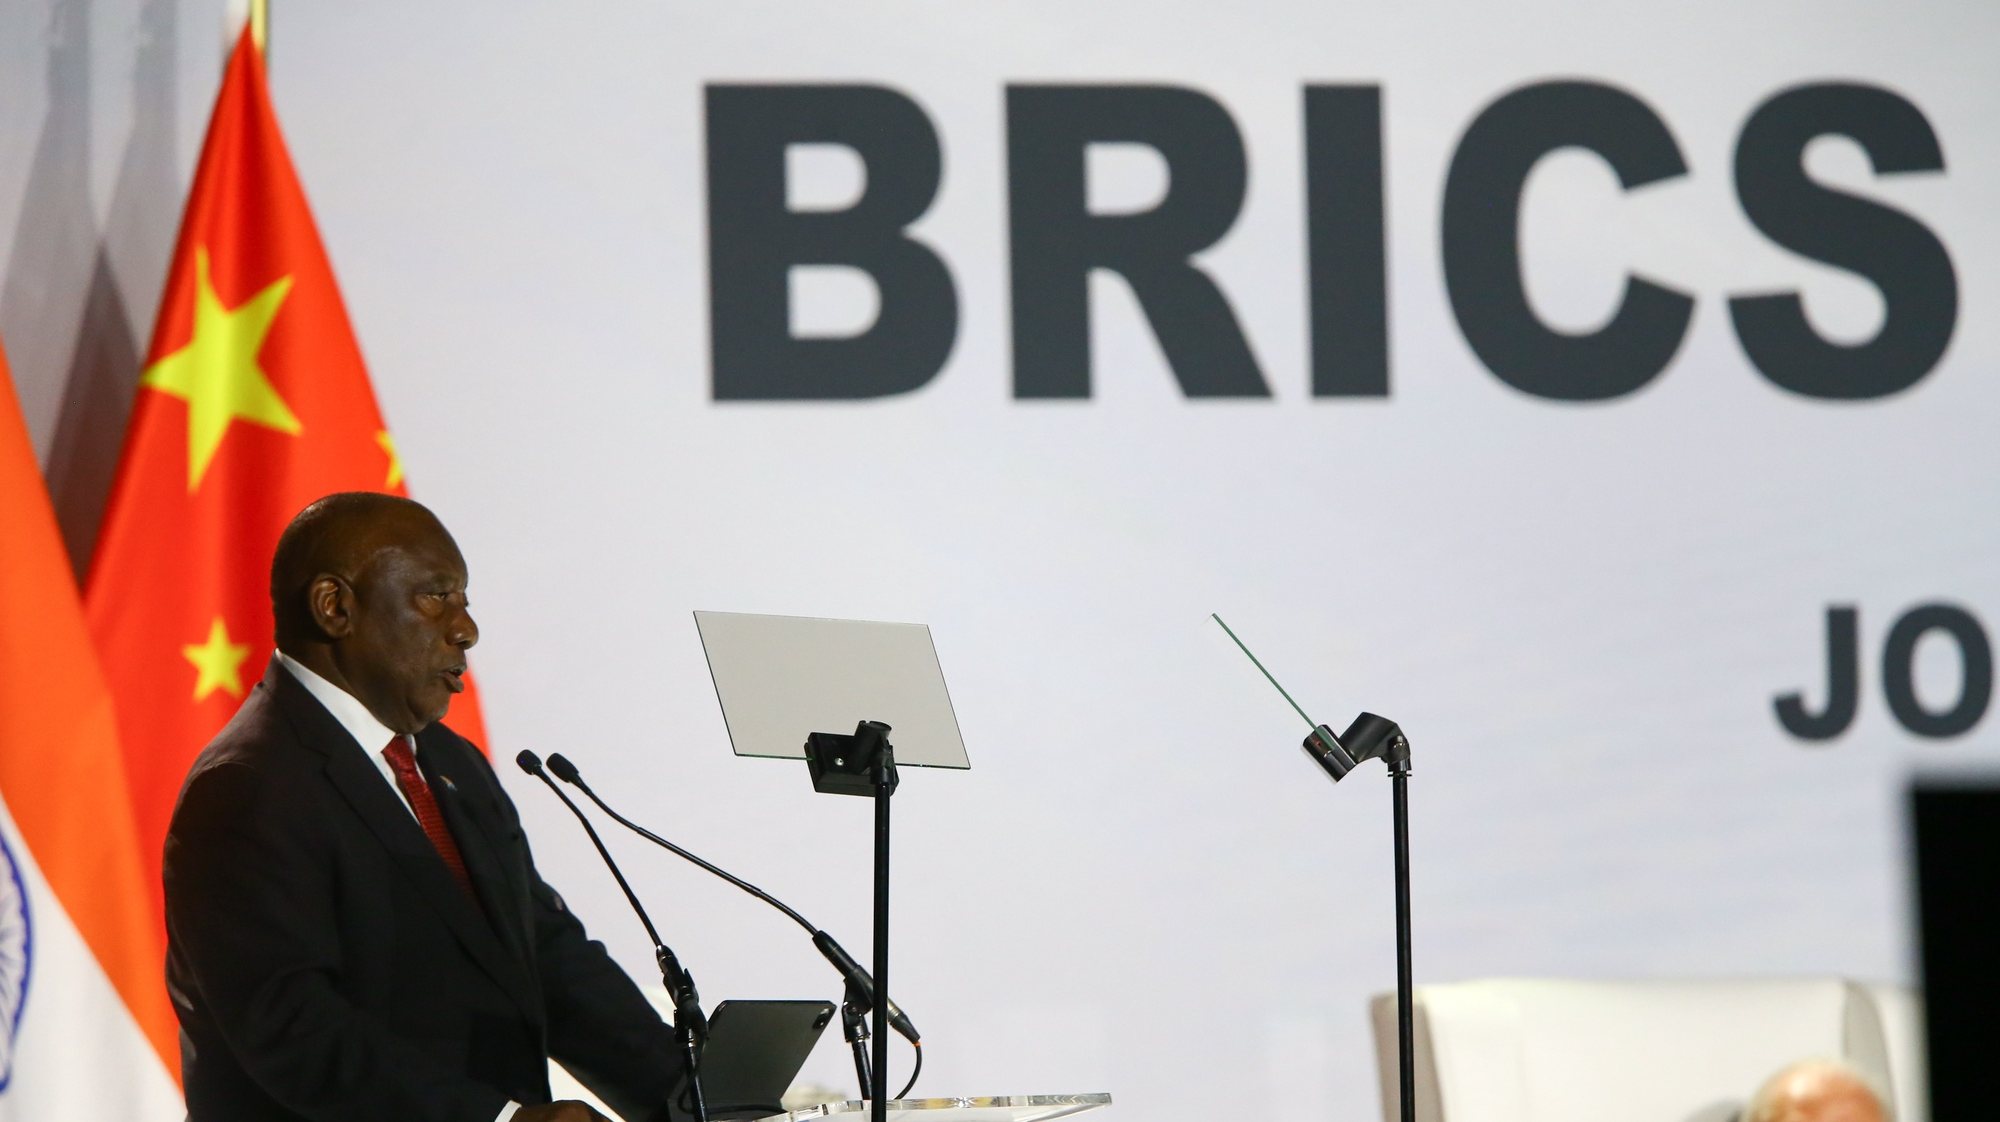 epa10813792 South African President Cyril Ramaphosa speaks during the 15th BRICS Summit, in Johannesburg, South Africa, 22 August 2023. South Africa is hosting the 15th BRICS Summit, (Brazil, Russia, India, China and South Africa), as the groupâ€™s economies account for a quarter of global gross domestic product. Dozens of leaders of other countries in Africa, Asia and the Middle East are also attending the summit.  EPA/KIM LUDBROOK